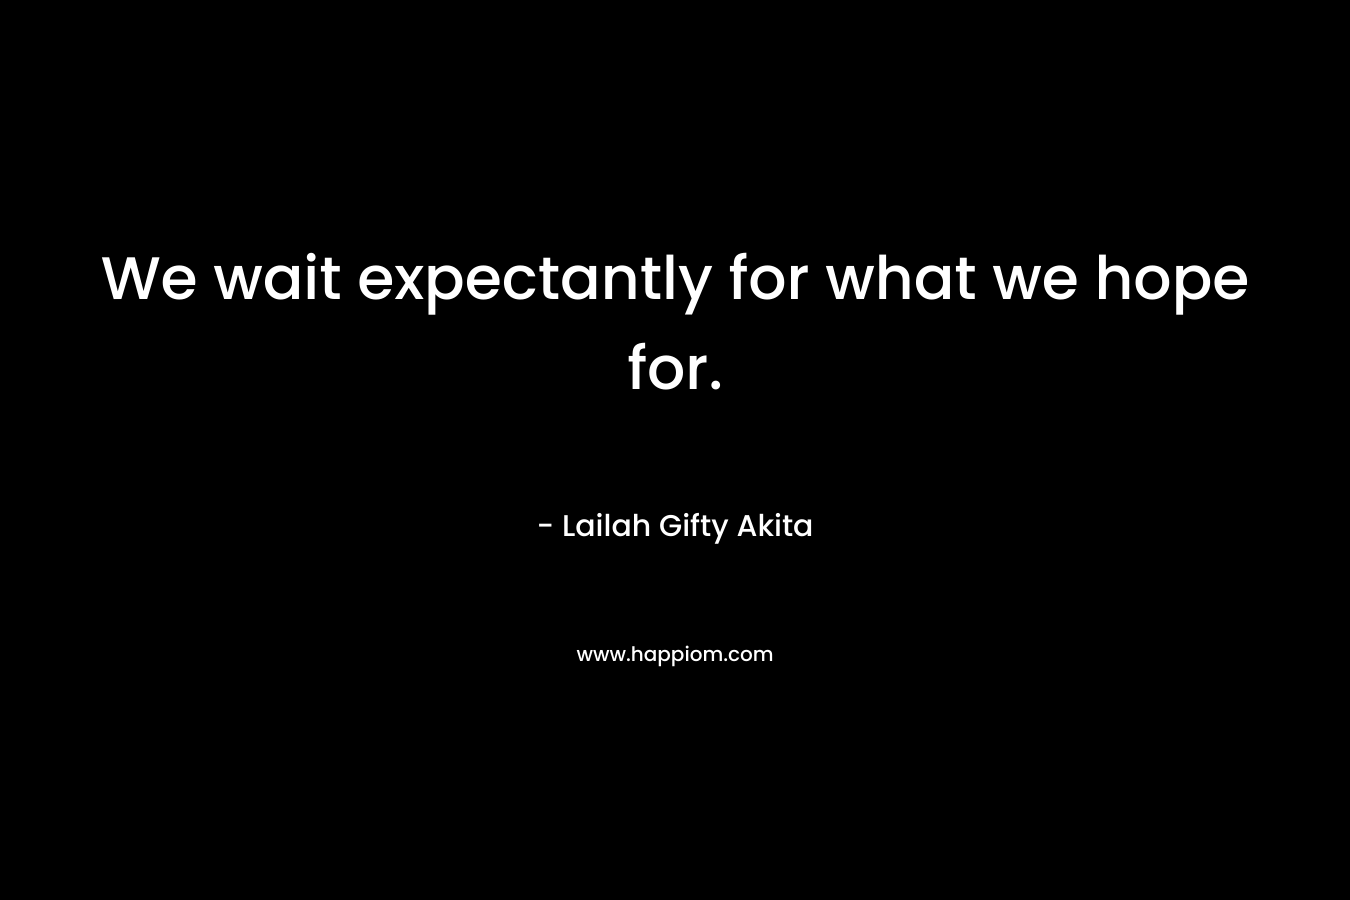 We wait expectantly for what we hope for.